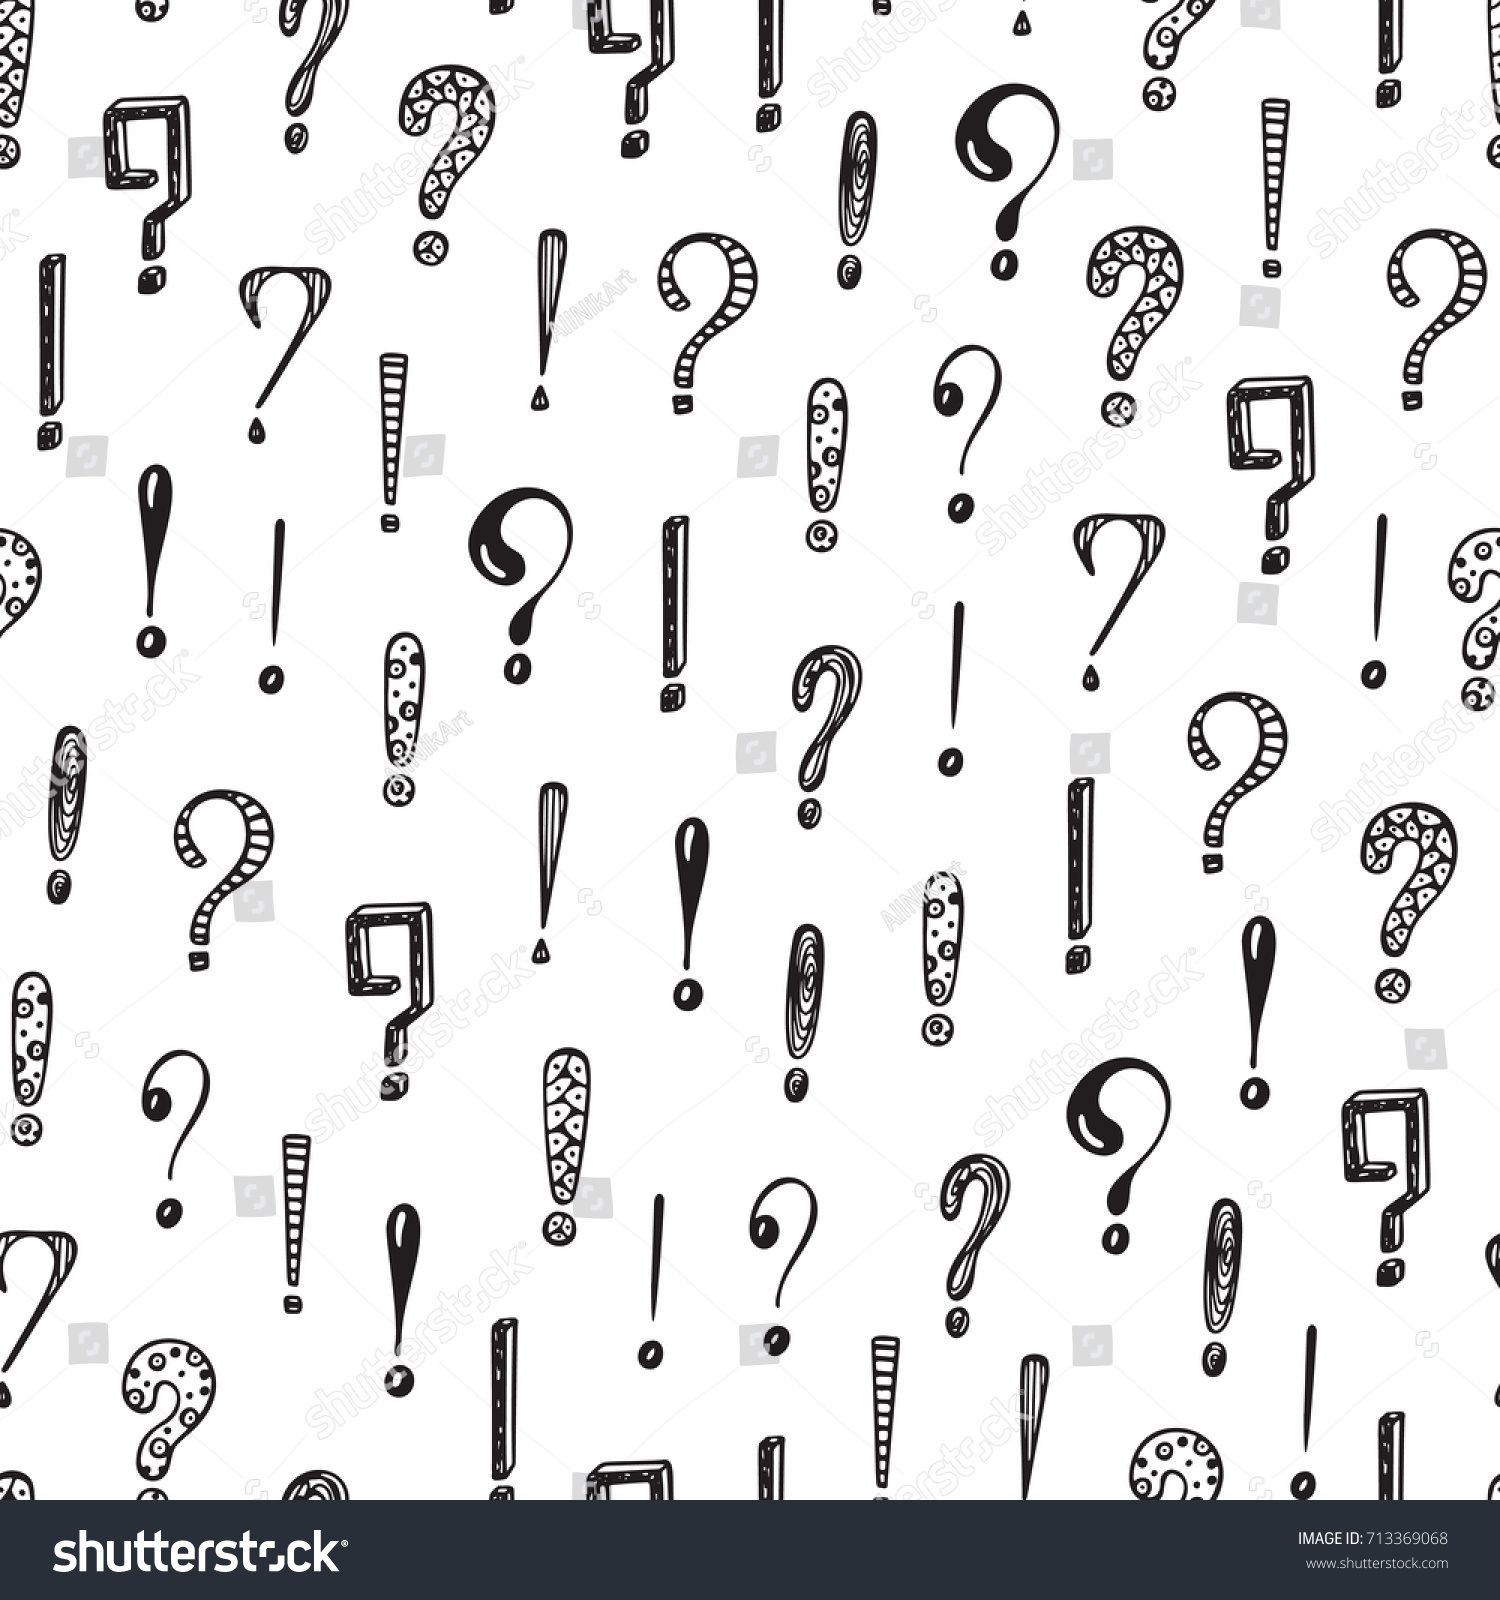 Seamless Vector Pattern Doodle Questions Marks Stock Vector Royalty Free 713369068 Shutterstock 9963